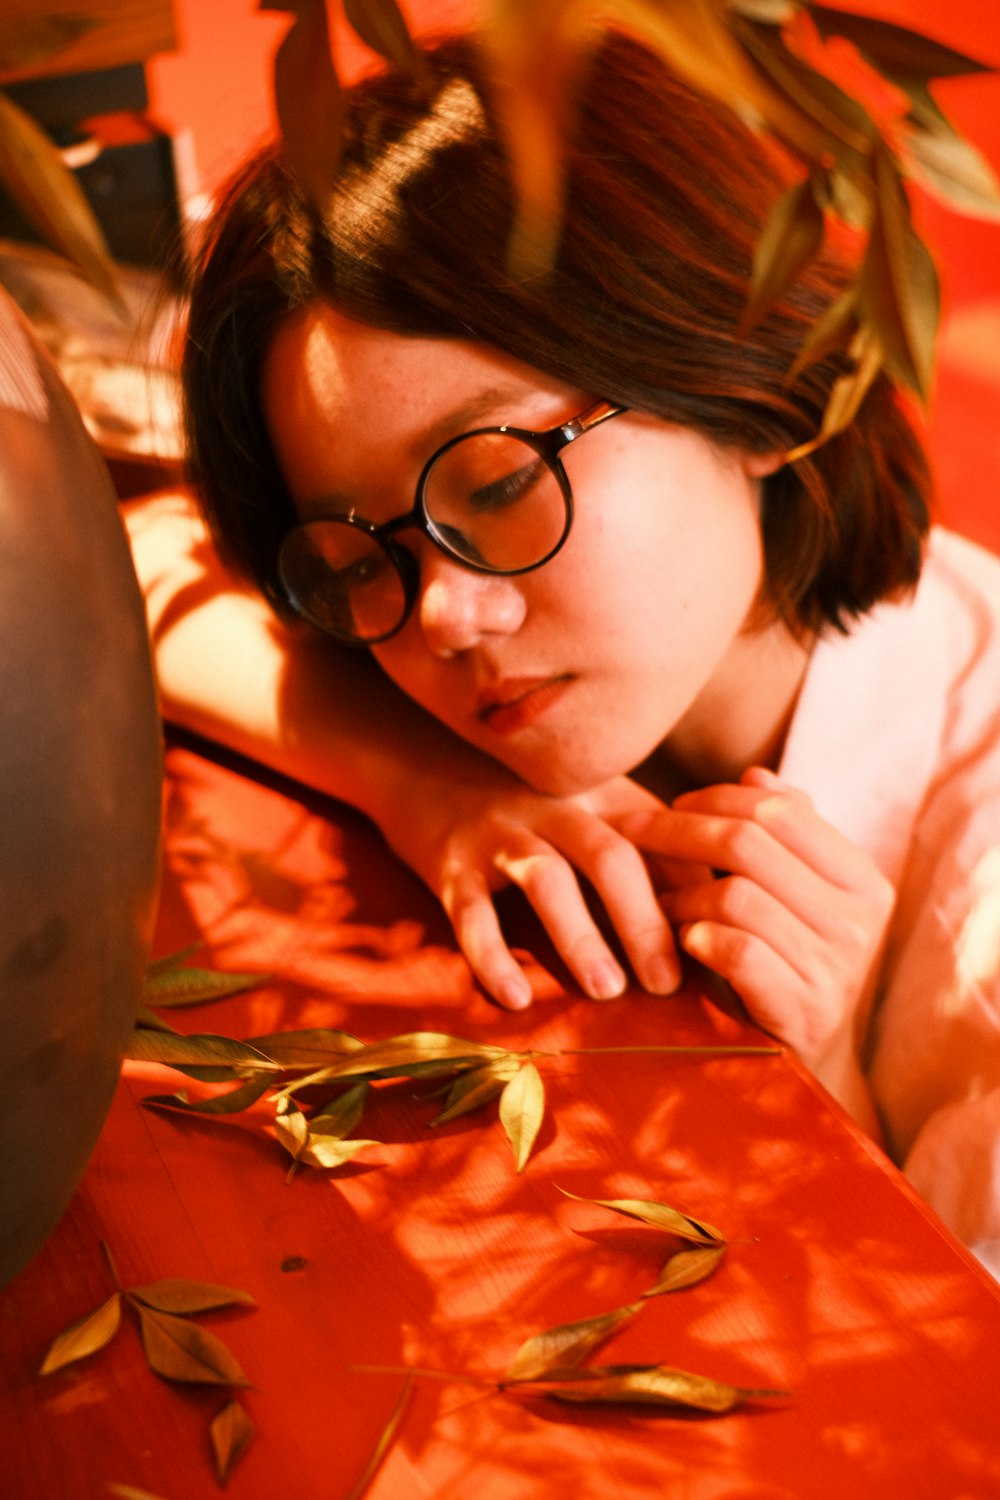 a woman wearing glasses laying on a red table